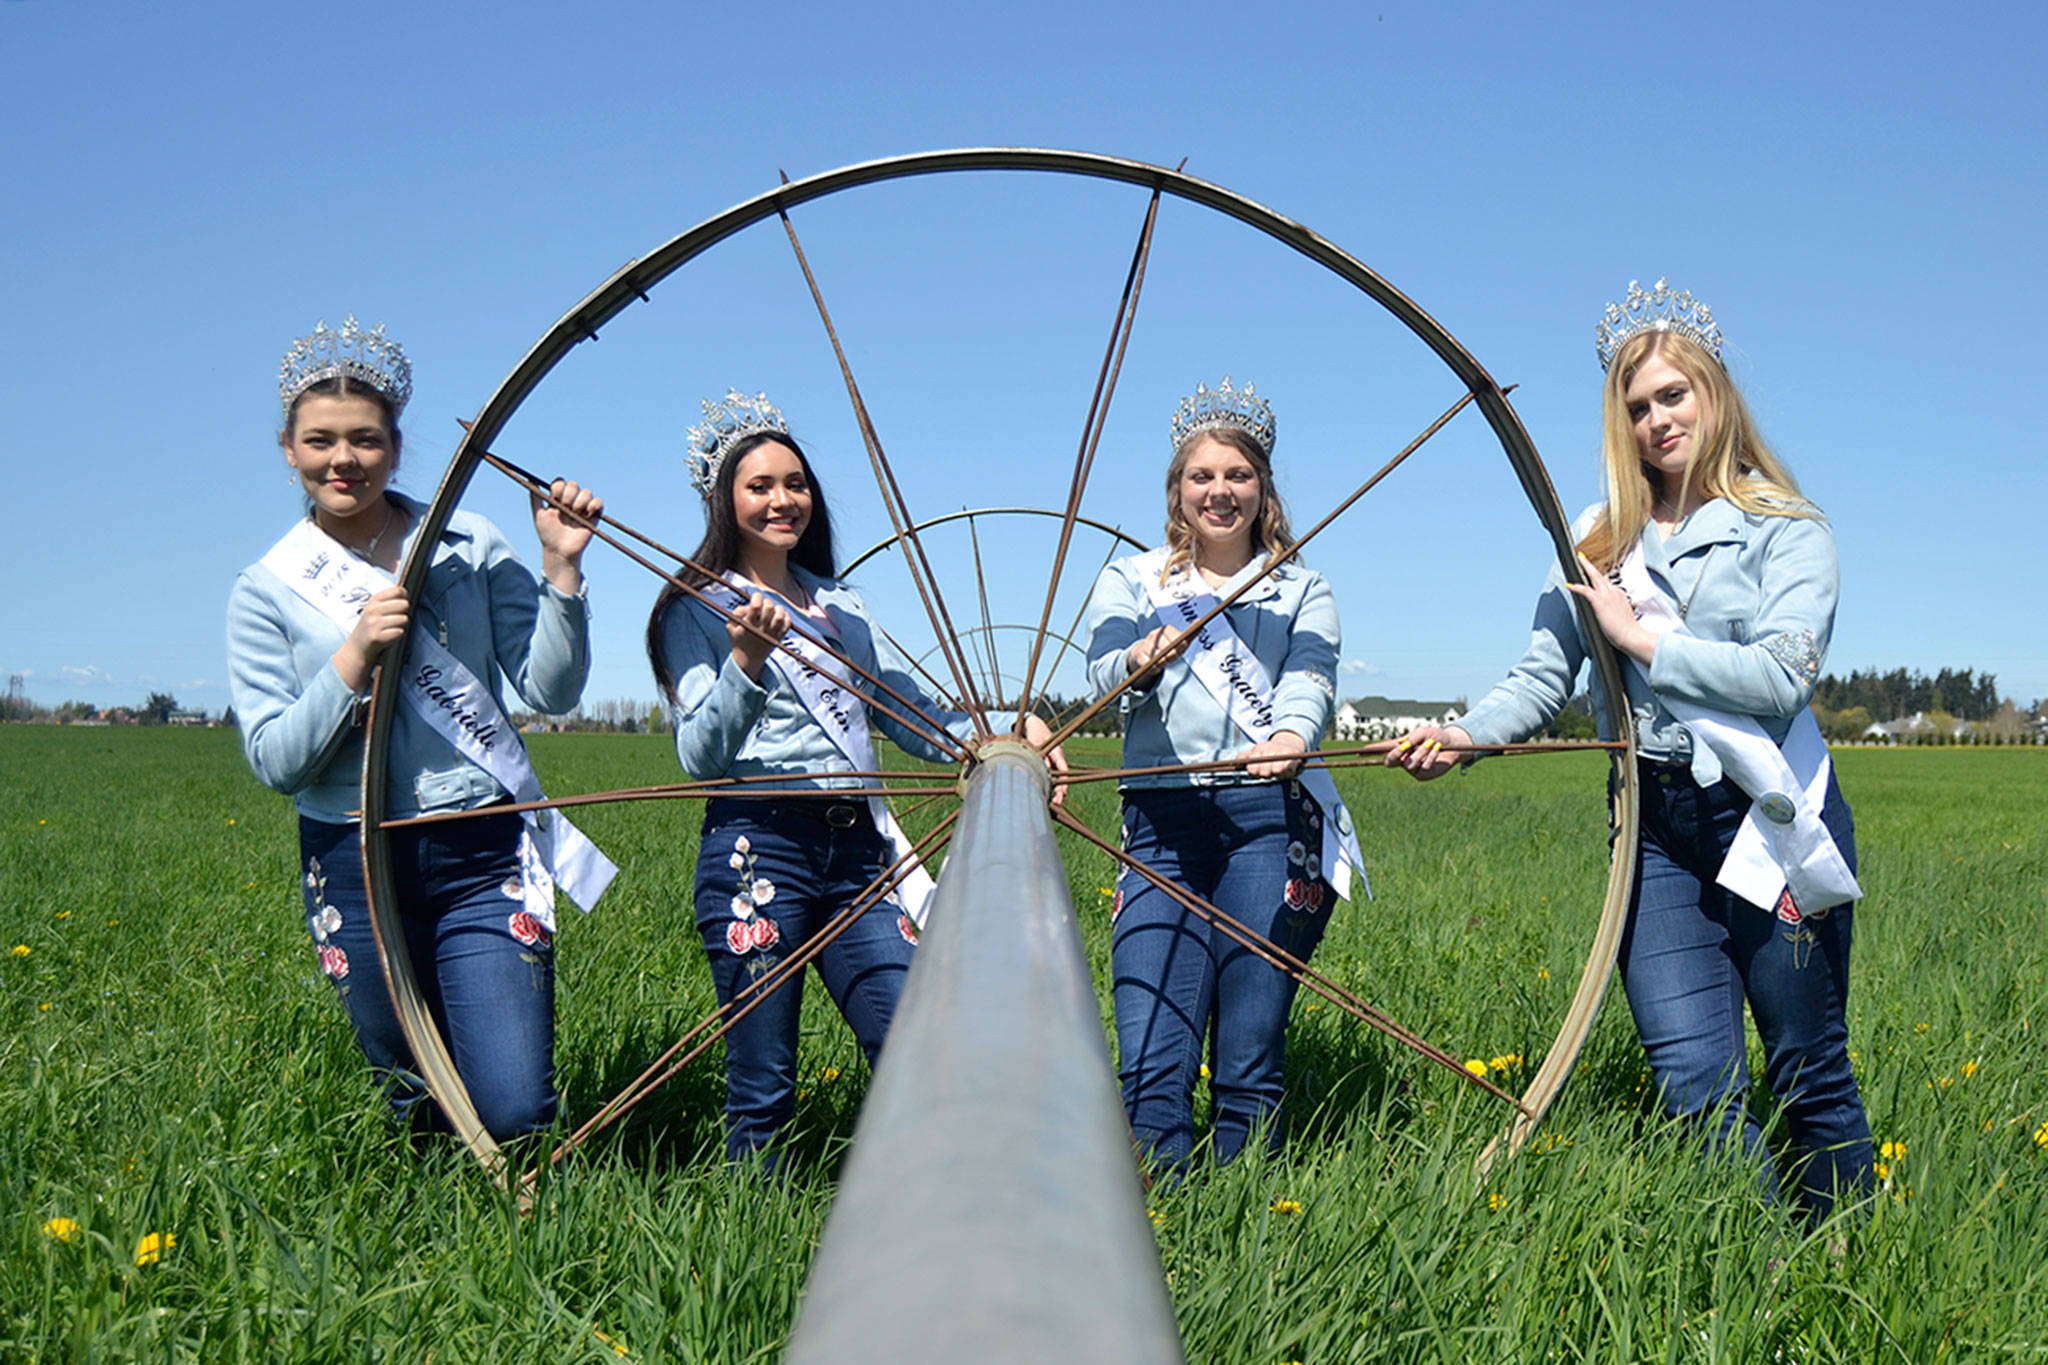 Sequim Irrigation Festival royalty, from left, Princess Gabi Simonson, Queen Erin Gordon, Princess Gracelyn Hurdlow, and Princess Eden Batson stand by a sprinkler on the Dick Family Farm during a photo shoot for the festival’s programming. Sequim Gazette photo by Matthew Nash